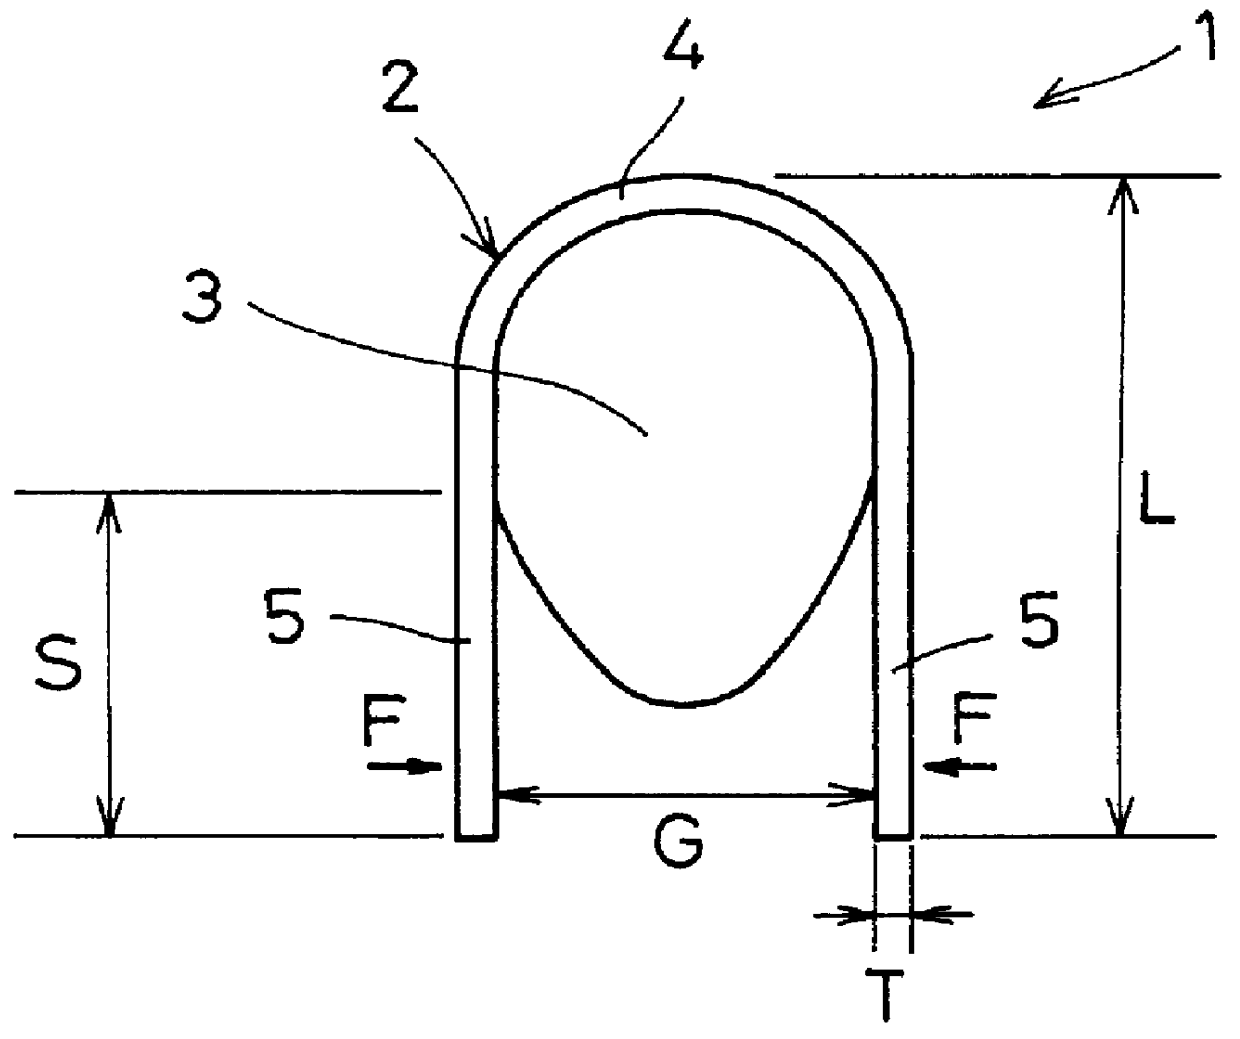 Vibration attenuating spring and damper mechanism using the same spring